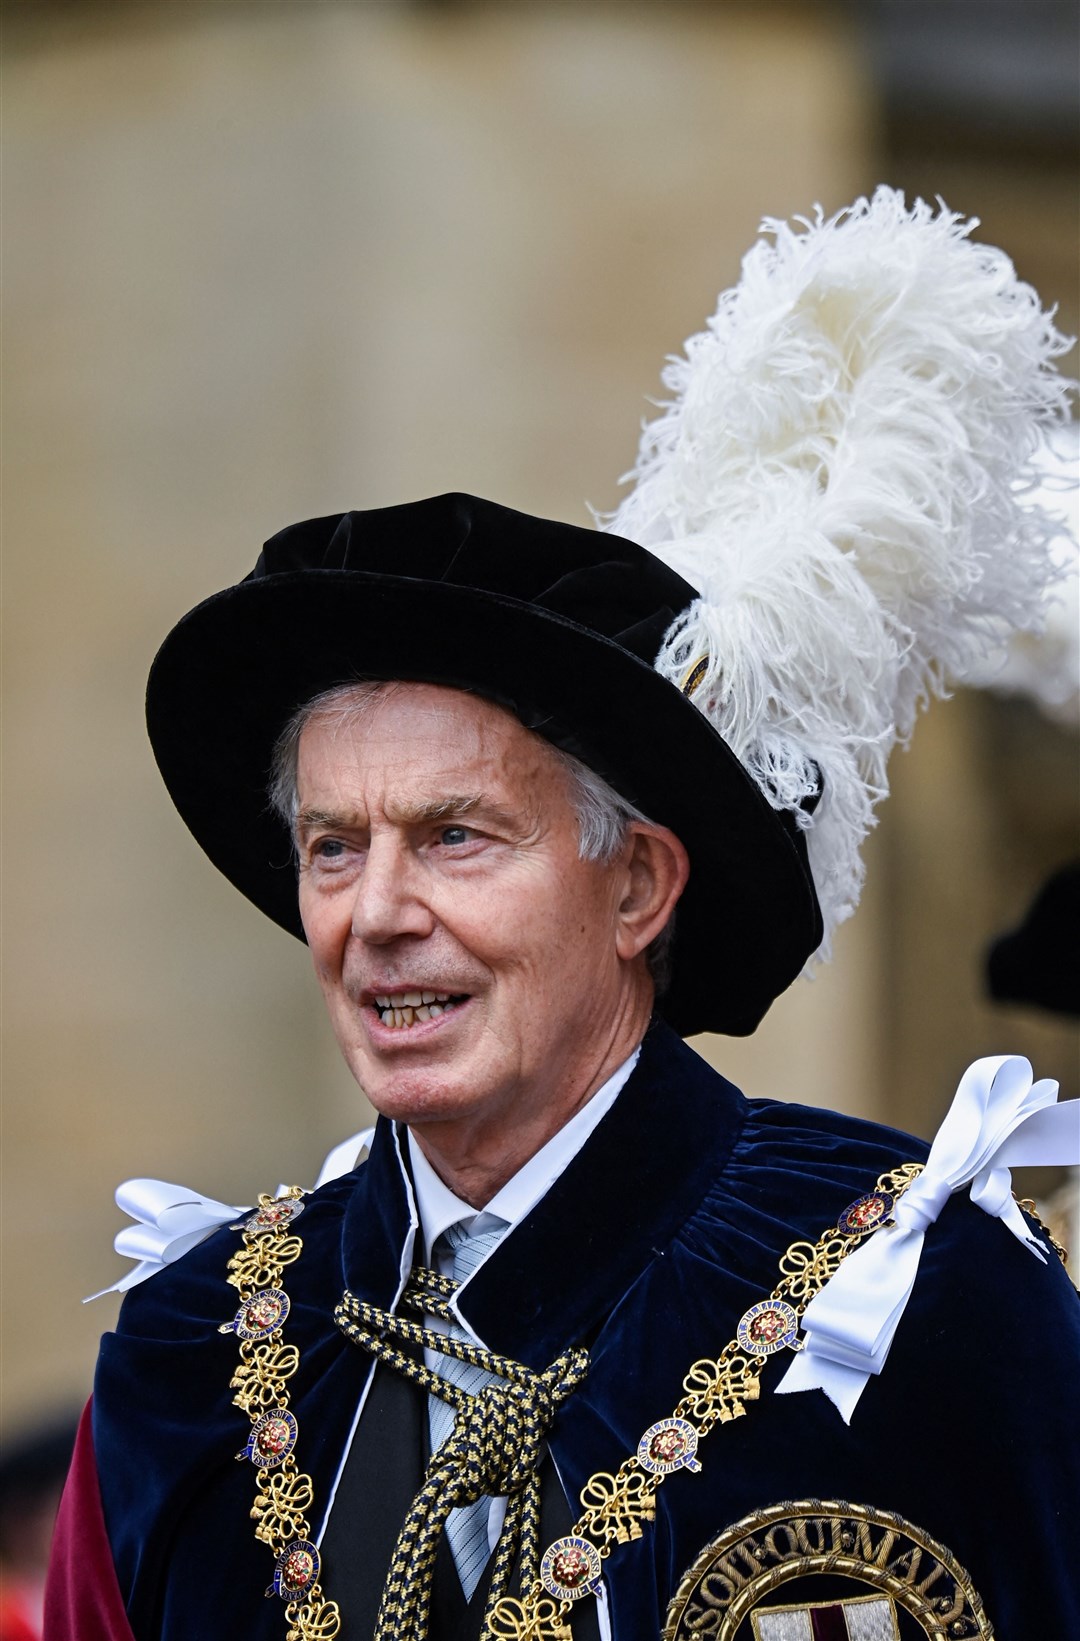 Former Prime Minister Sir Tony Blair during the annual Order of the Garter Service at St George’s Chapel, Windsor Castle (Toby Melville/PA)